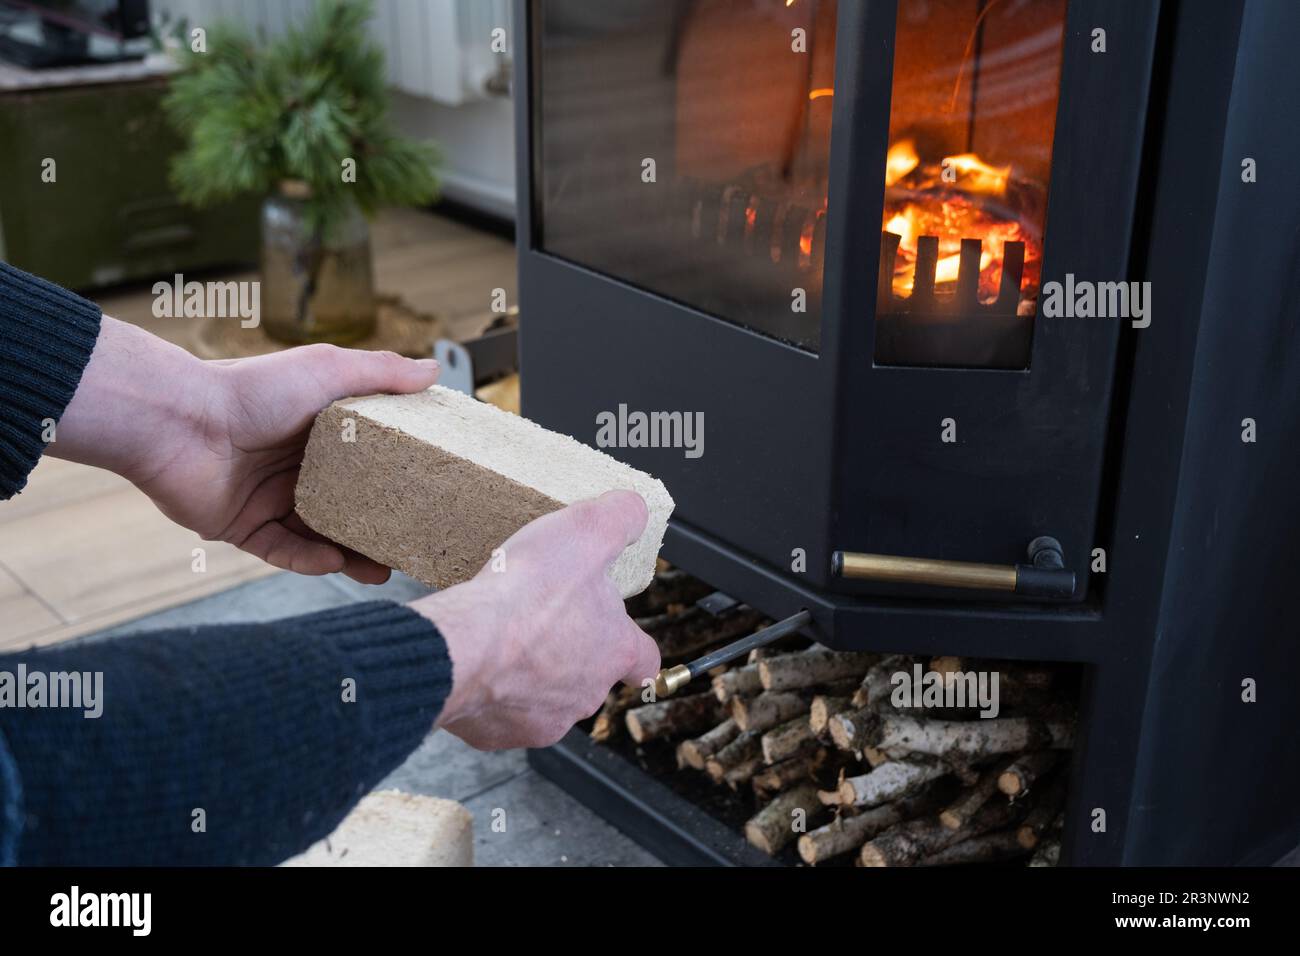 Hands kindle the hearth with economical briquettes. Fuel briquettes made of pressed sawdust for kindling the furnace - economica Stock Photo